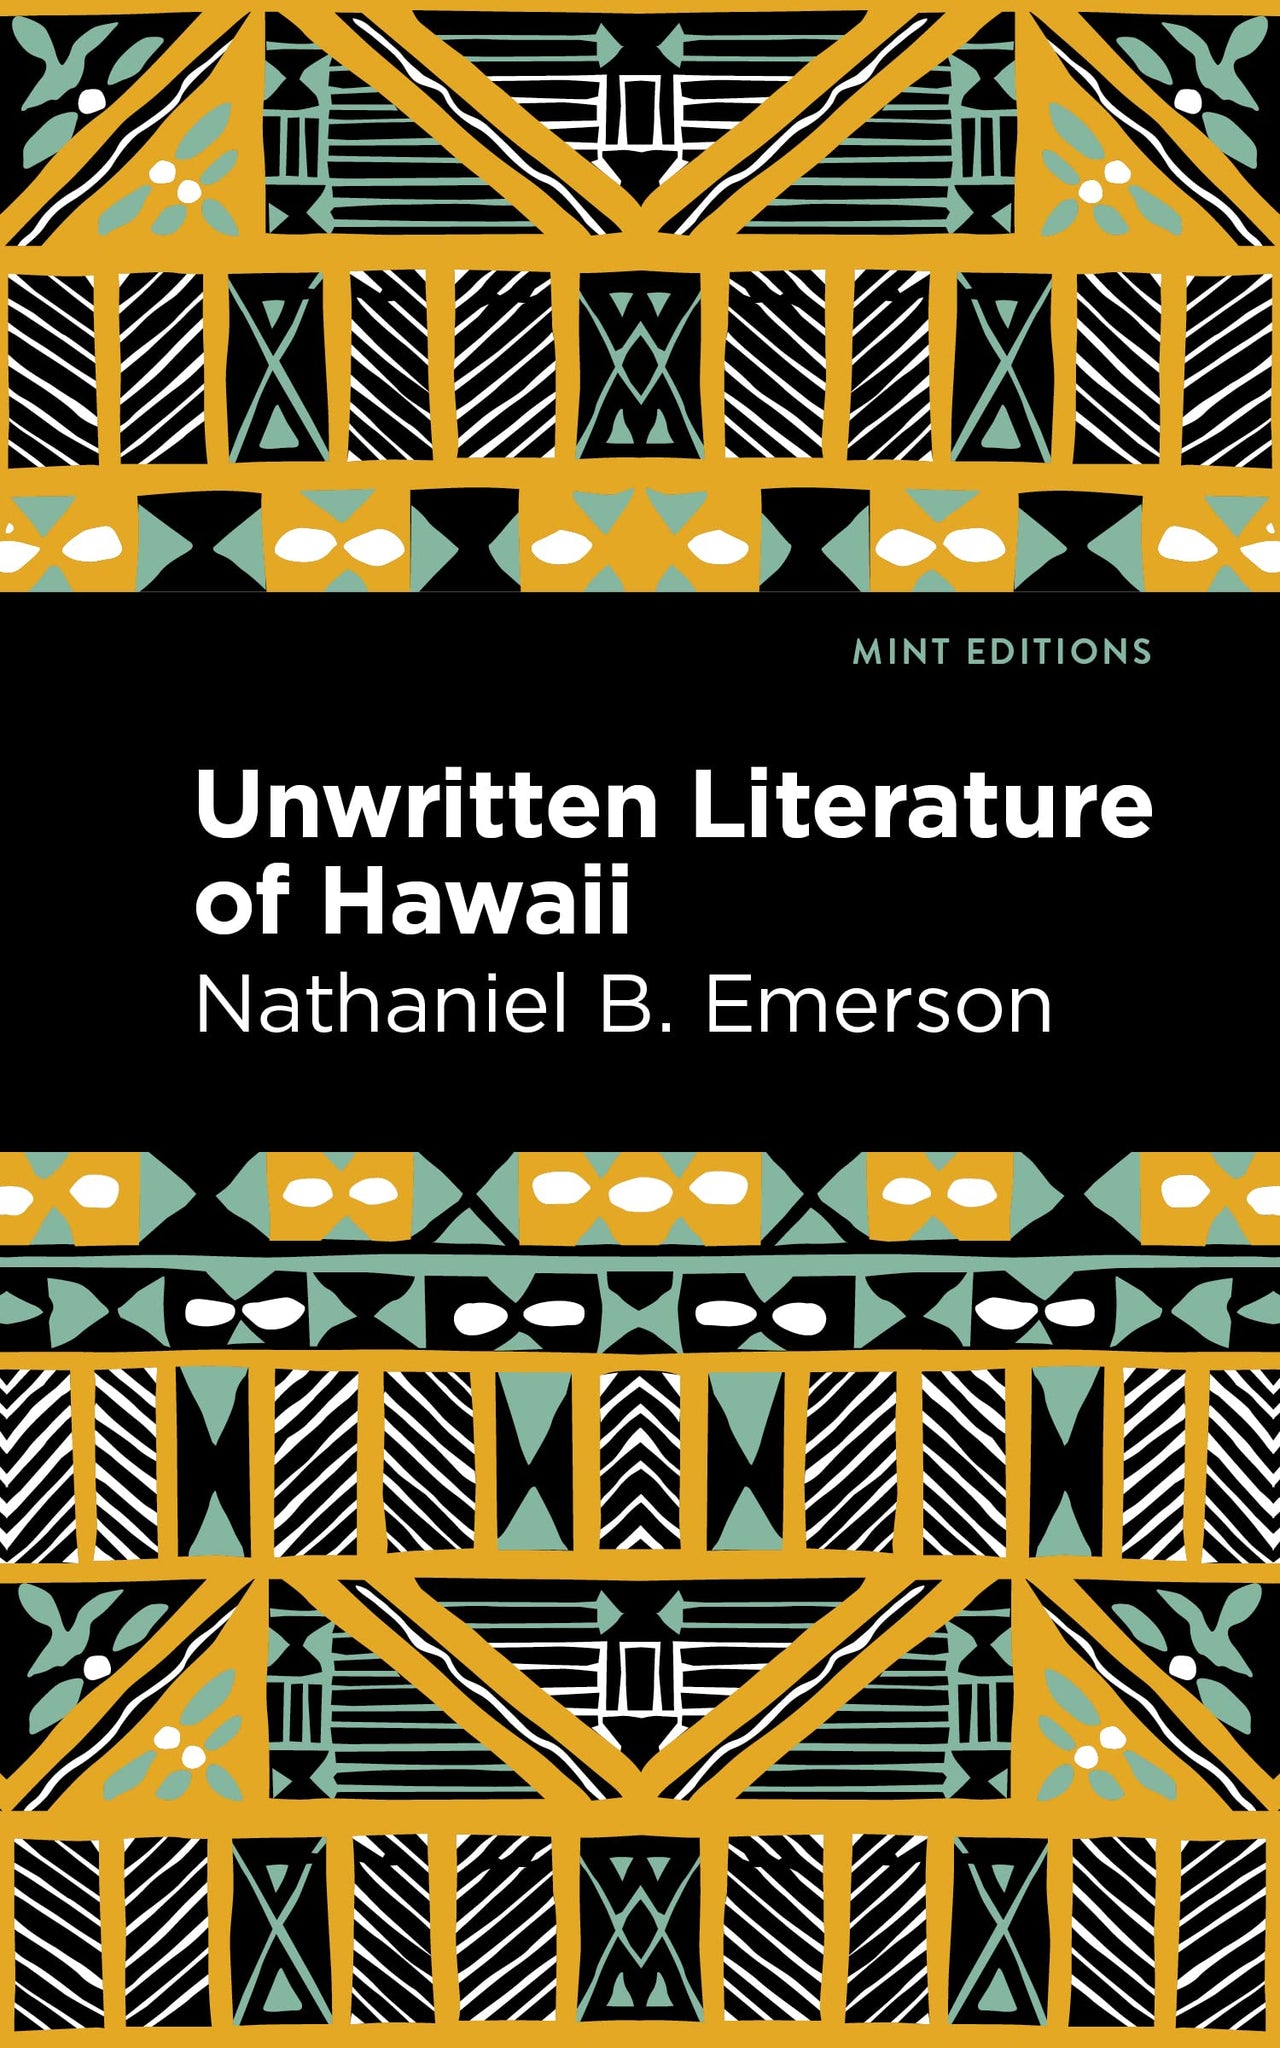 Unwritten Literature of Hawaii : The Sacred Songs of the Hula by Nathaniel B. Emerson